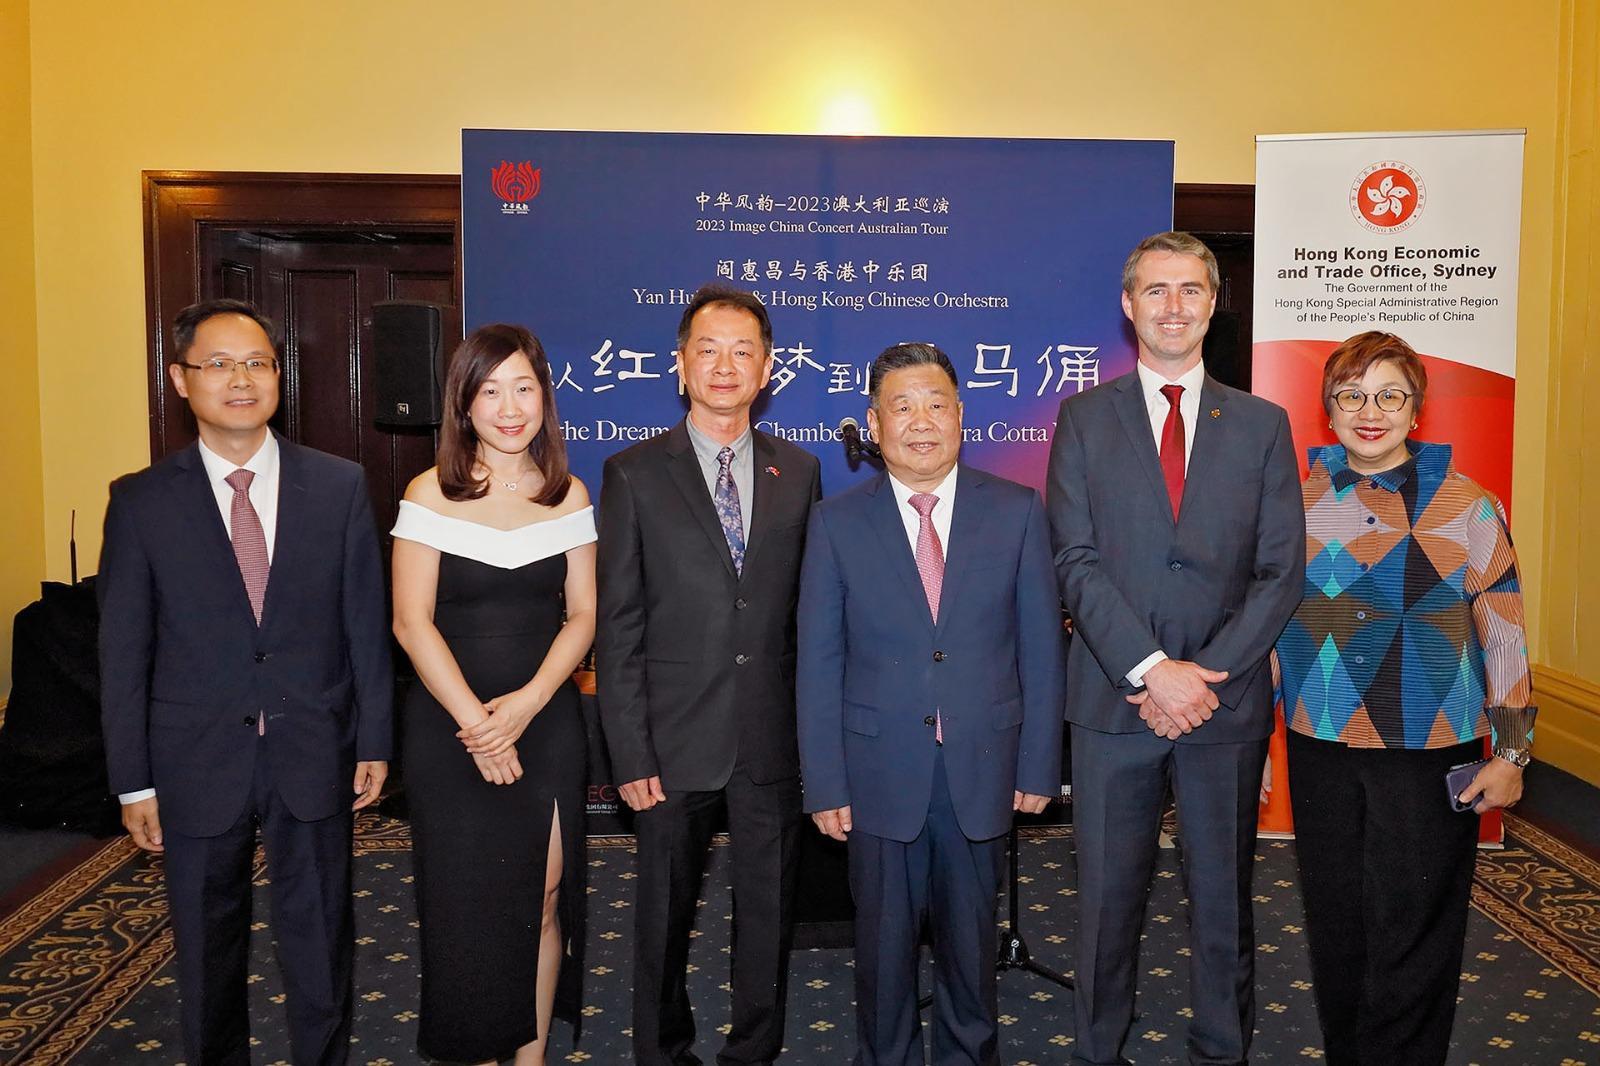 The Hong Kong Economic and Trade Office, Sydney (Sydney ETO) is supporting the Hong Kong Chinese Orchestra (HKCO) in its staging of three music concerts in Australia. Photo shows (from left) the President of the China Arts and Entertainment Group Limited, Mr Li Jinsheng; the Director of the Sydney ETO, Miss Trista Lim; the Acting Consul General of the People’s Republic of China in Melbourne, Mr Zeng Jianhua; the President of the Bauhinia Culture Group Corporation Limited, Mr Xu Zhengzhong; member of the Parliament of Victoria Mr John Mullahy; and the Executive Director of the HKCO, Dr Celina Chin Man Wah, at a reception in Melbourne on December 19.